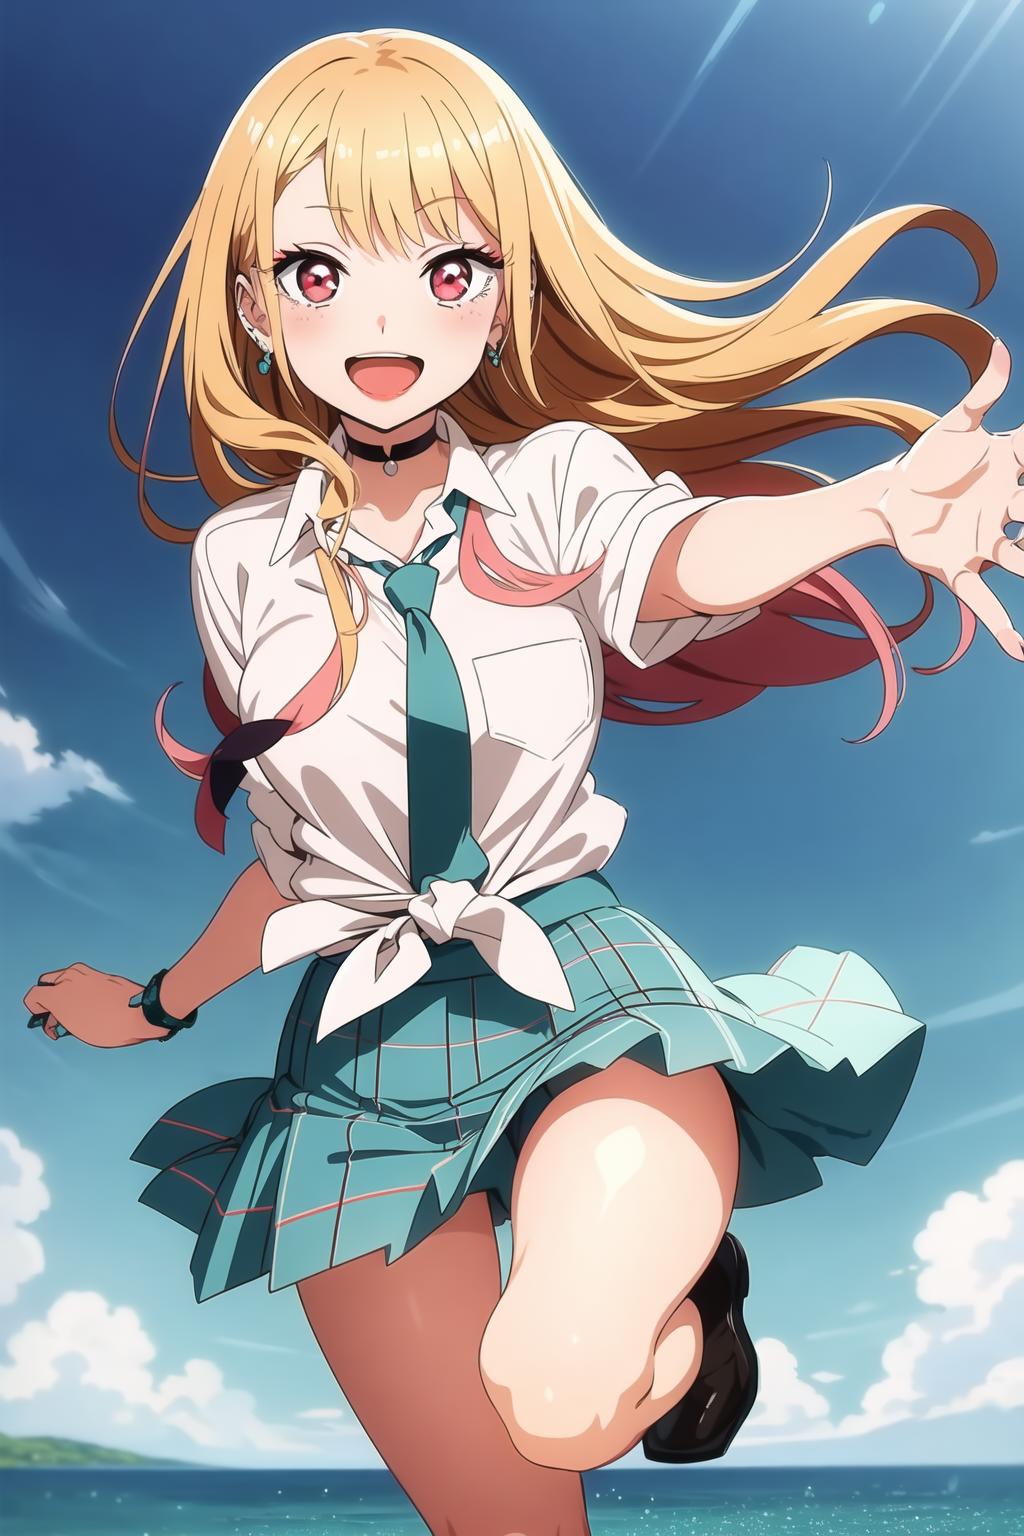 Anime Girl with Pigtails, a Blue Plaid Skirt, and a Blue Tie